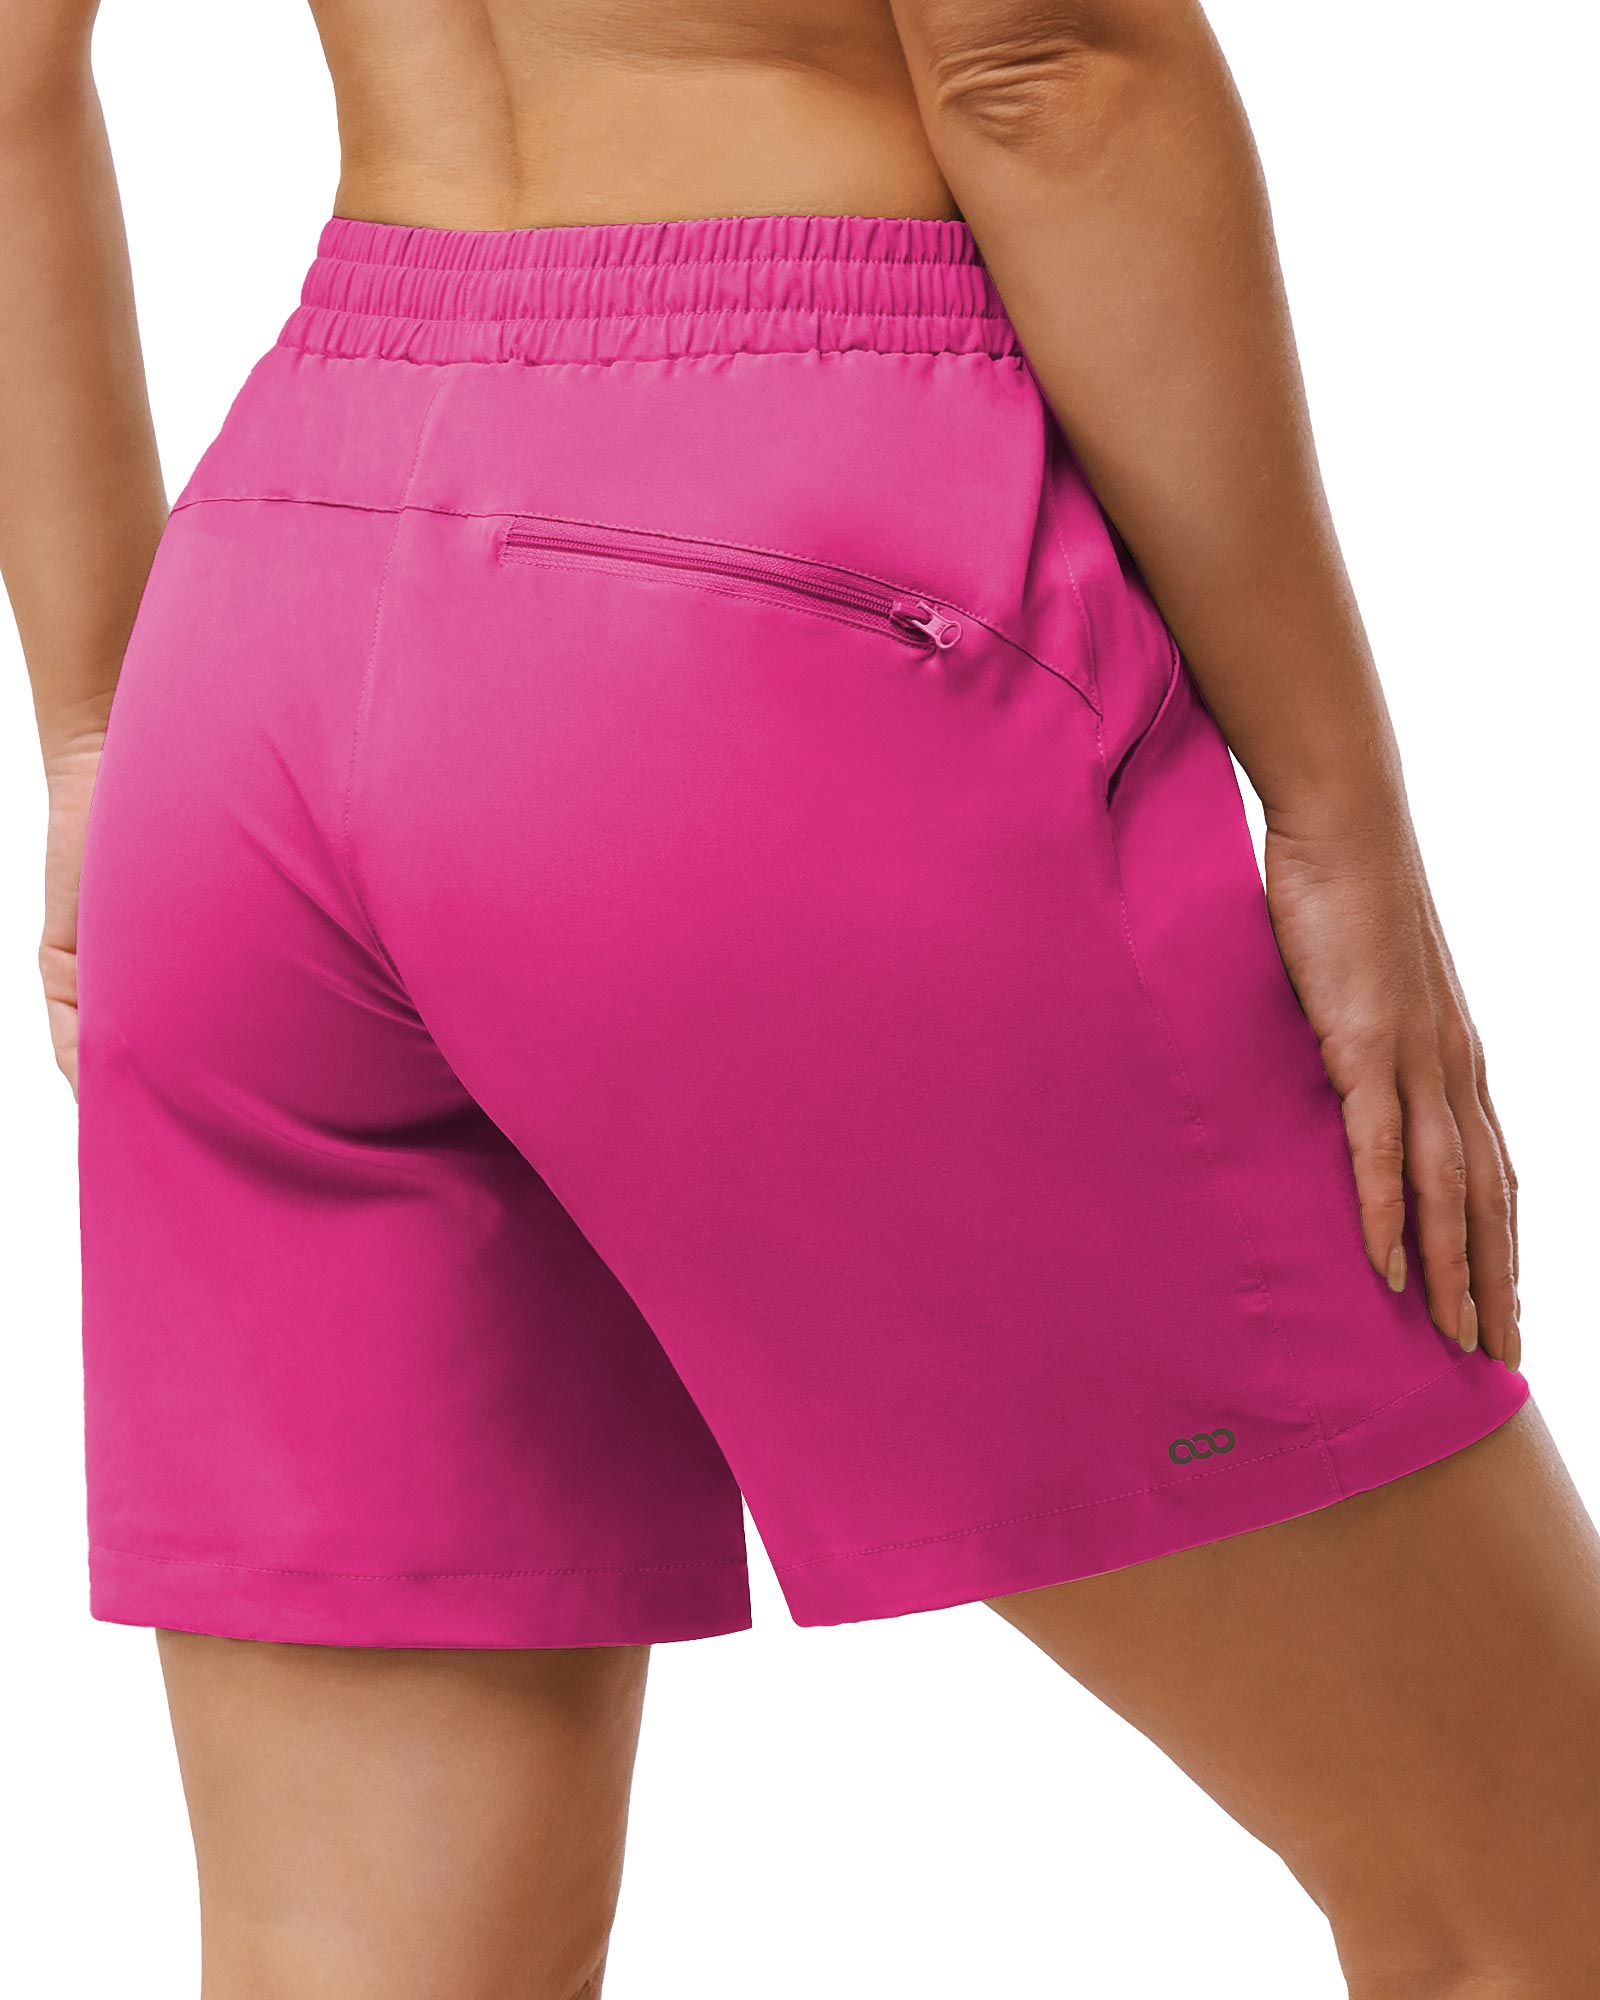 Women's 5 Hiking Shorts with 4 Pockets – 33,000ft